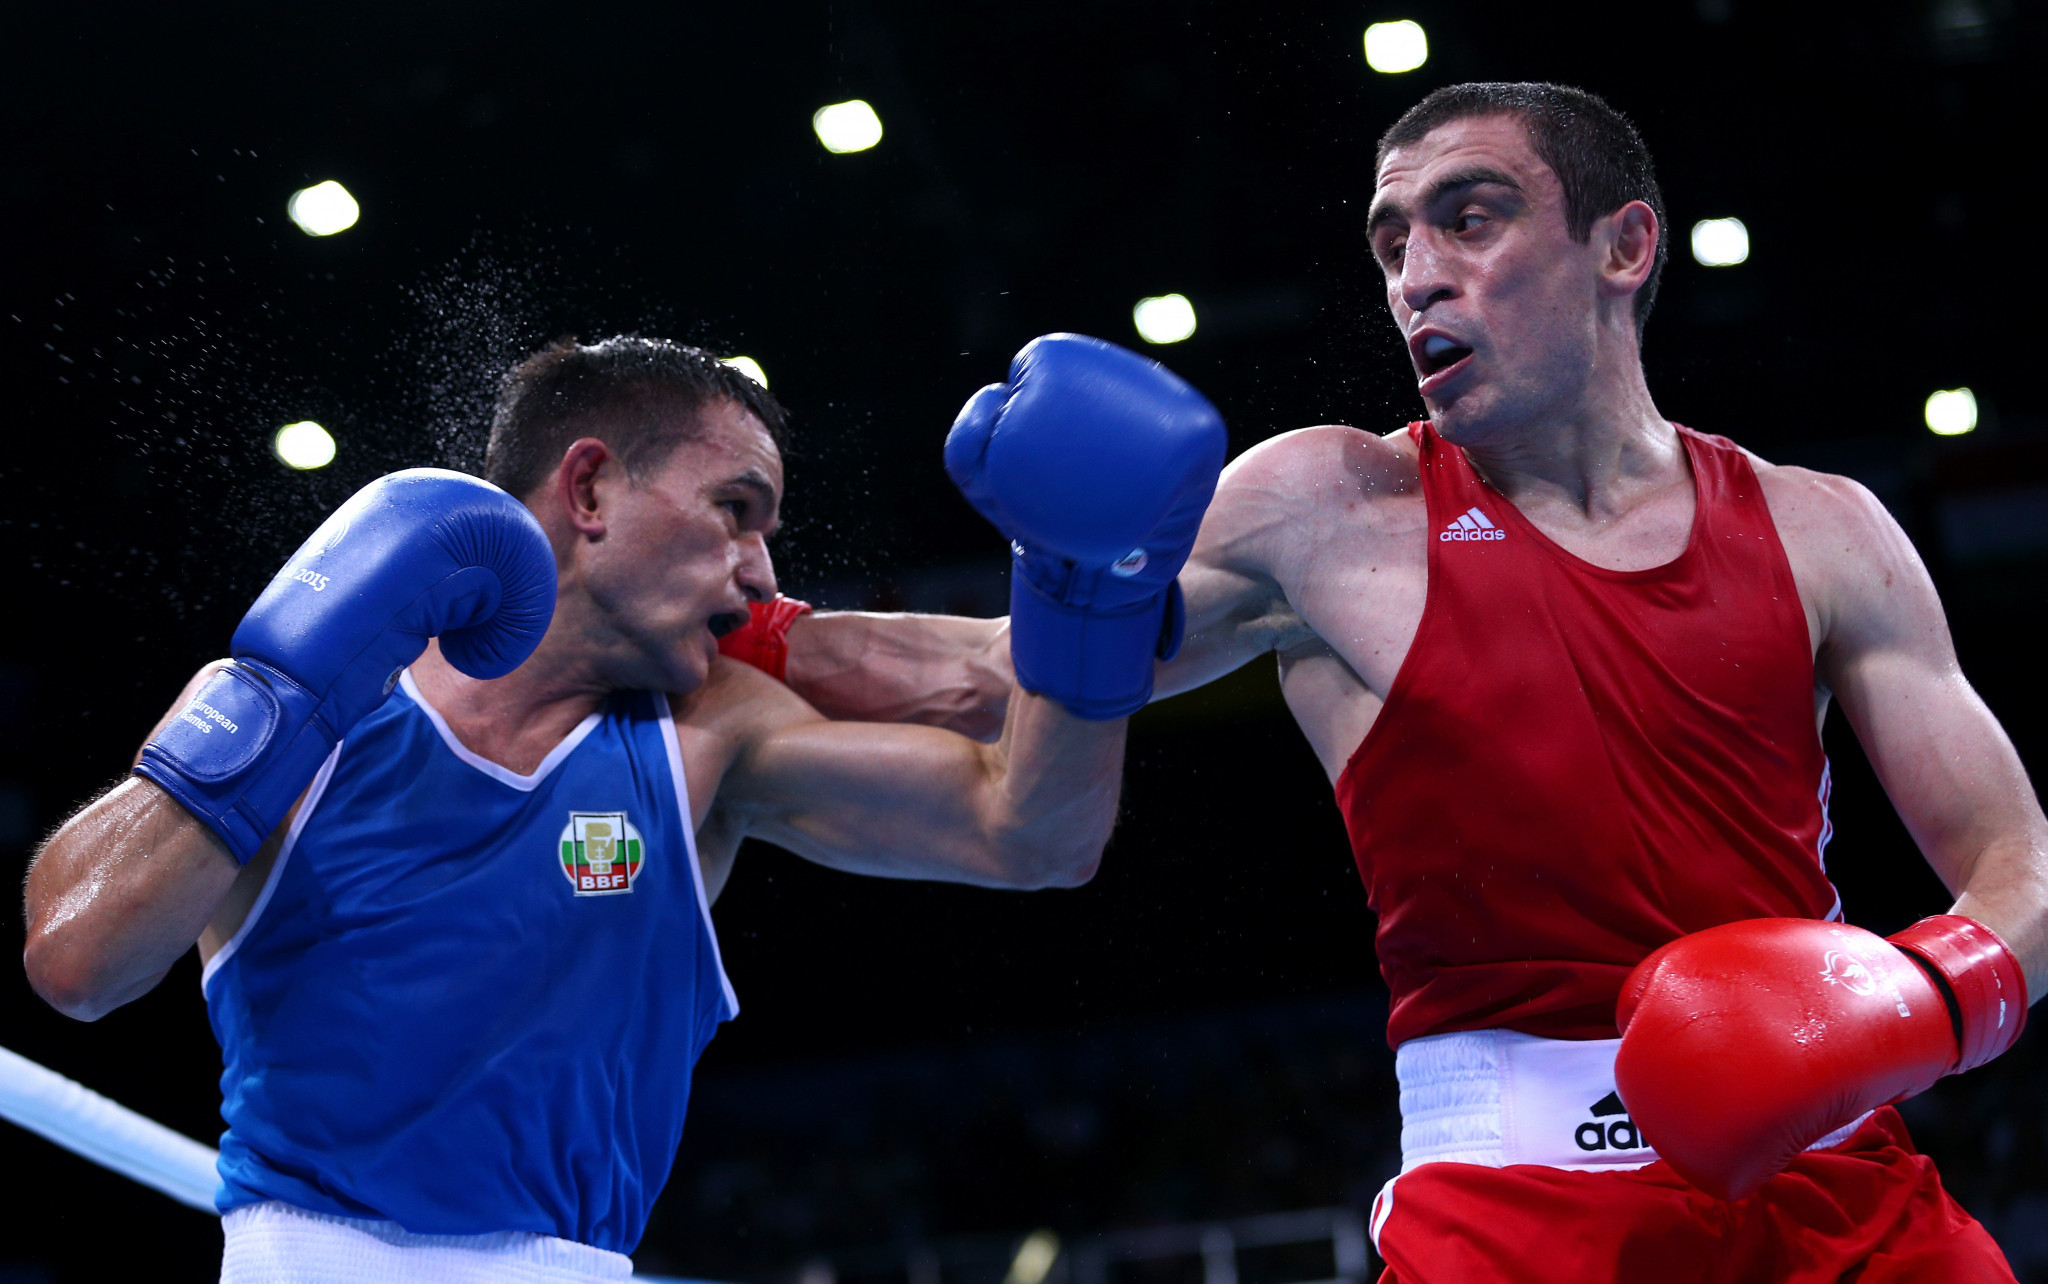 Abdulmutalim Abakarov coached Azerbaijan’s Albert Selimov, in red, during a career that included winning a World Championship title and gold medal at the European Games in Baku ©Getty Images